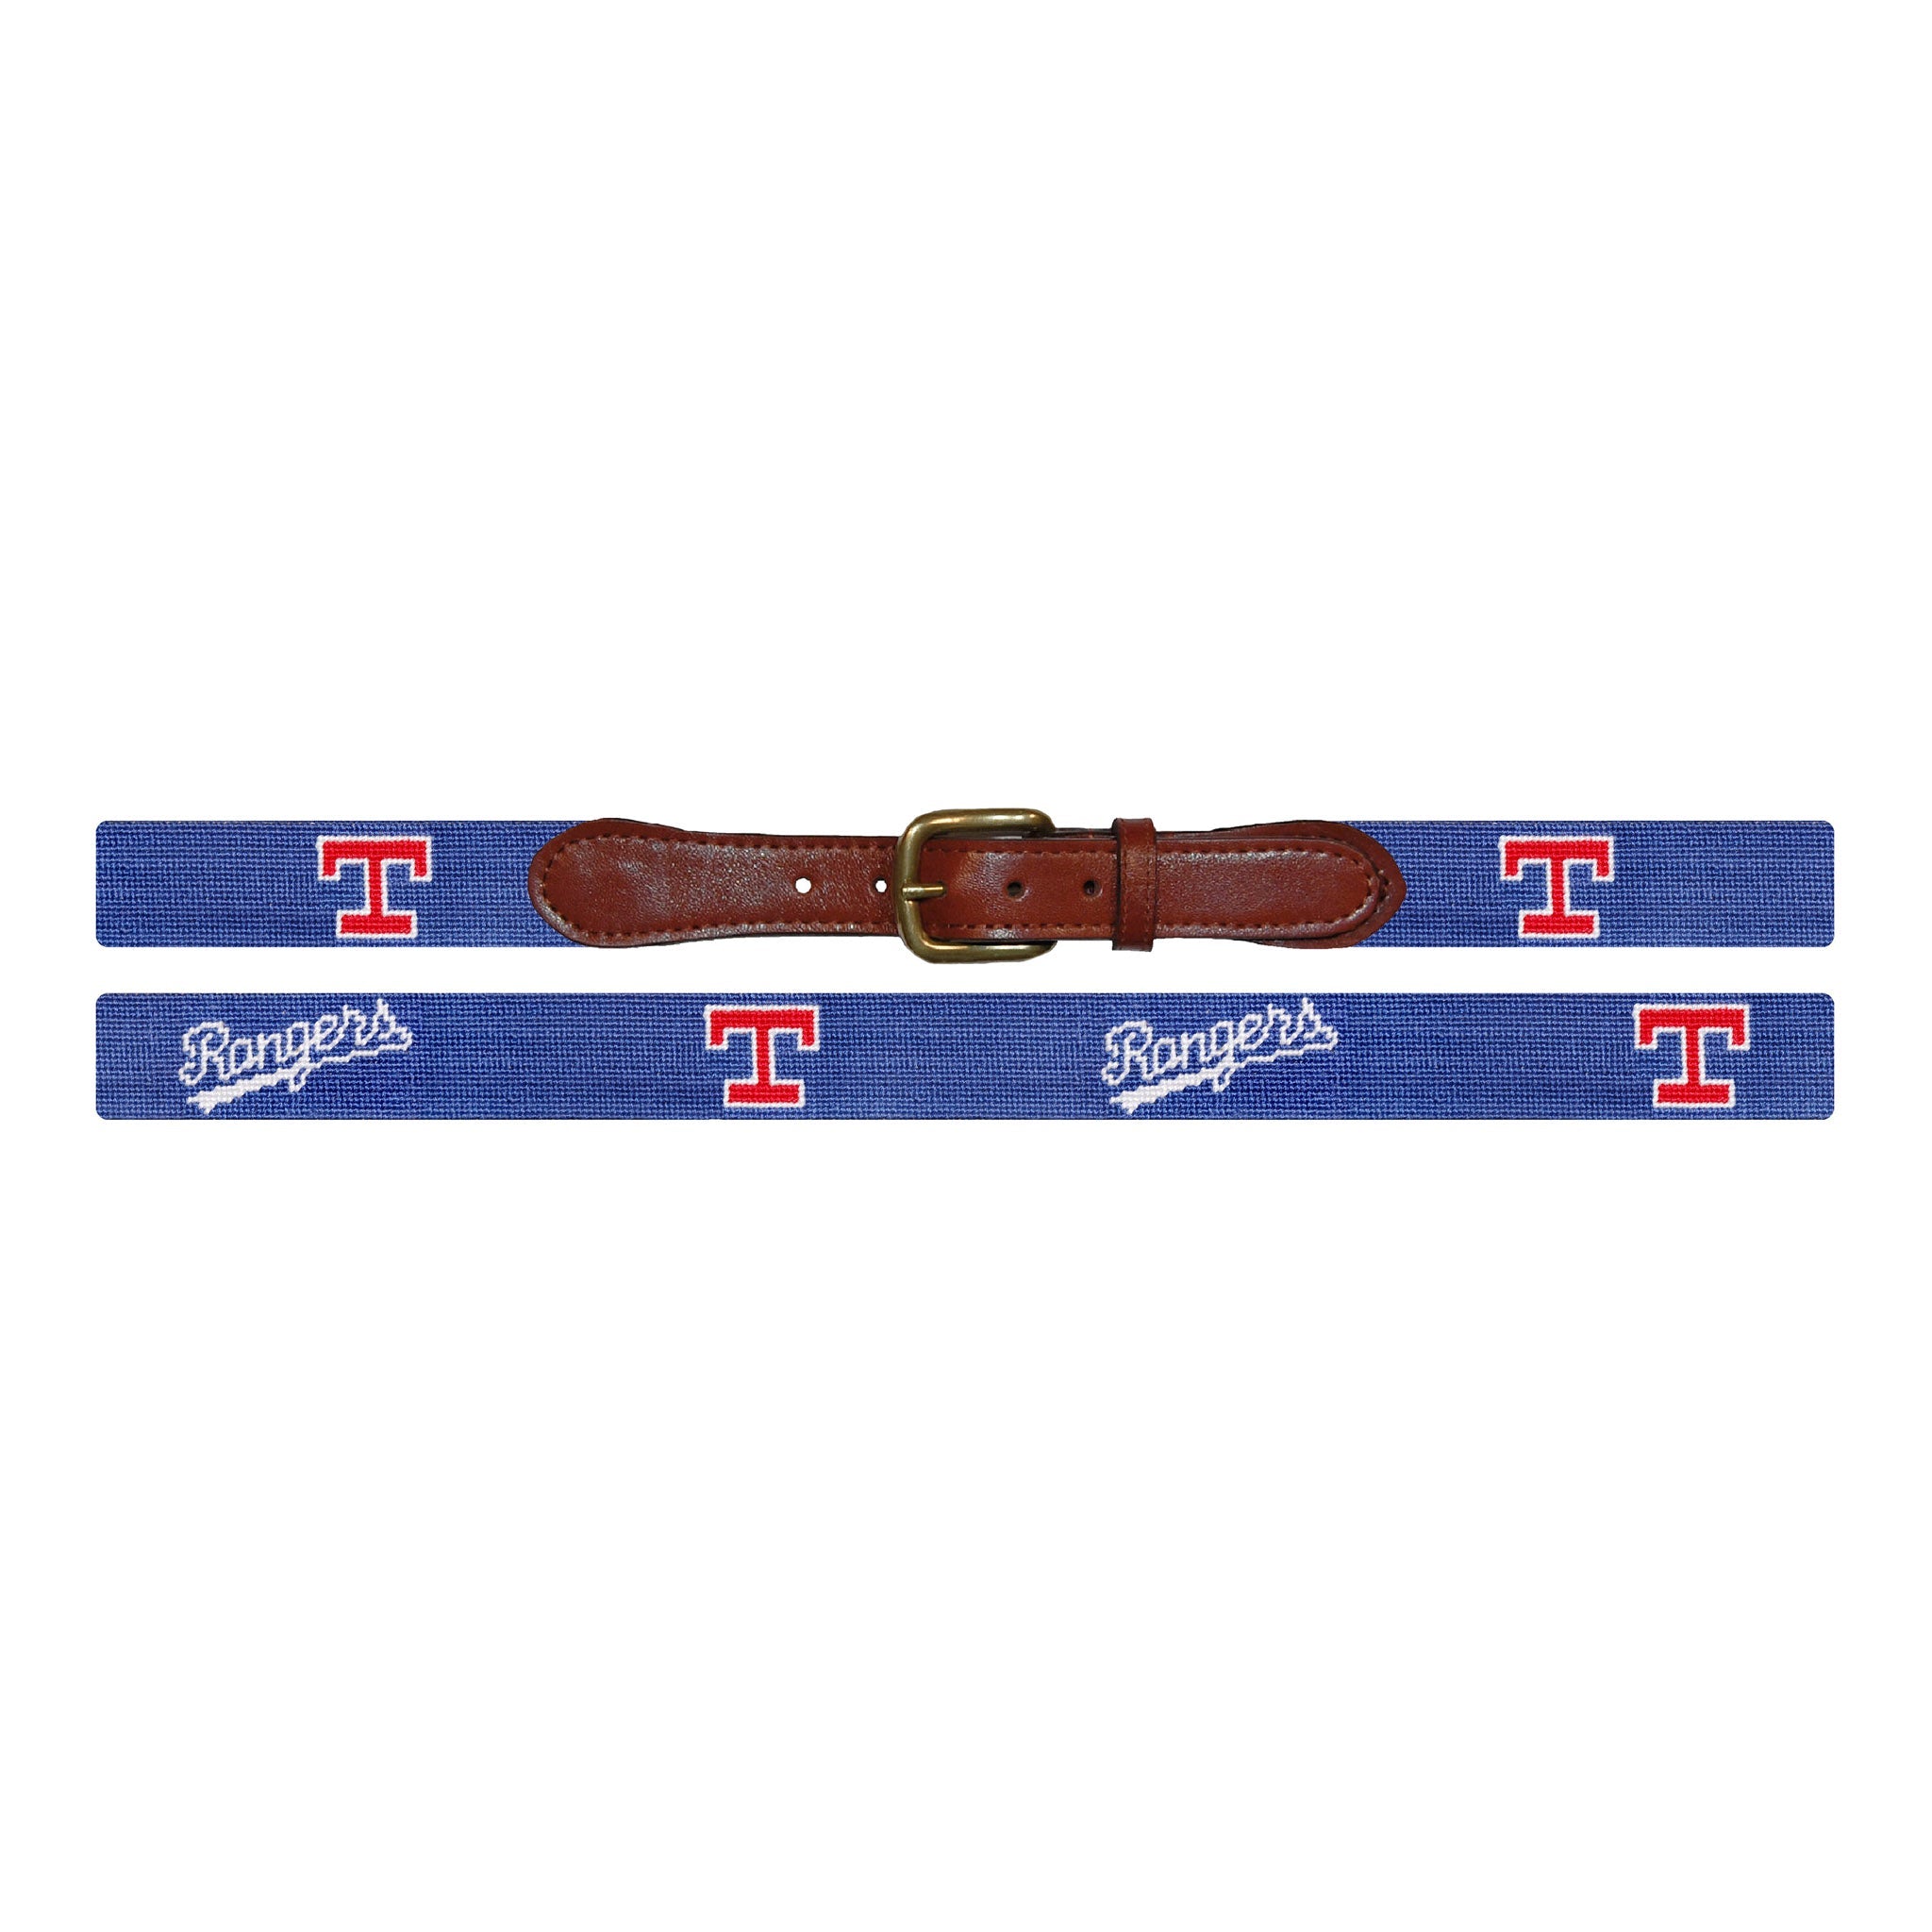 Smathers and Branson Texas Rangers Cooperstown Needlepoint Belt Laid Out 